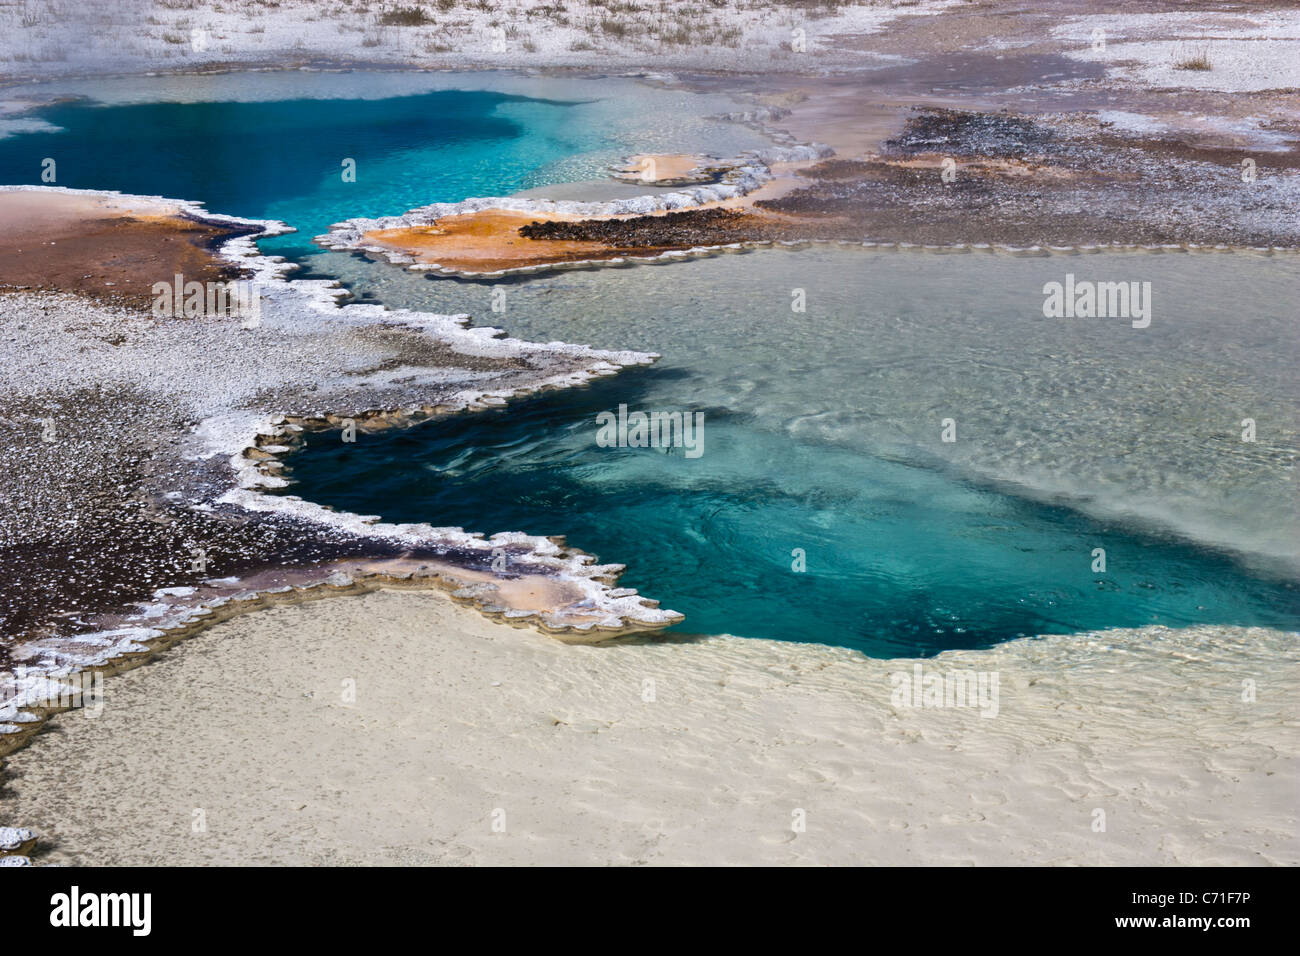 Hot Springs in Upper Geyser Basin nel Parco Nazionale di Yellowstone in Wyoming. Foto Stock